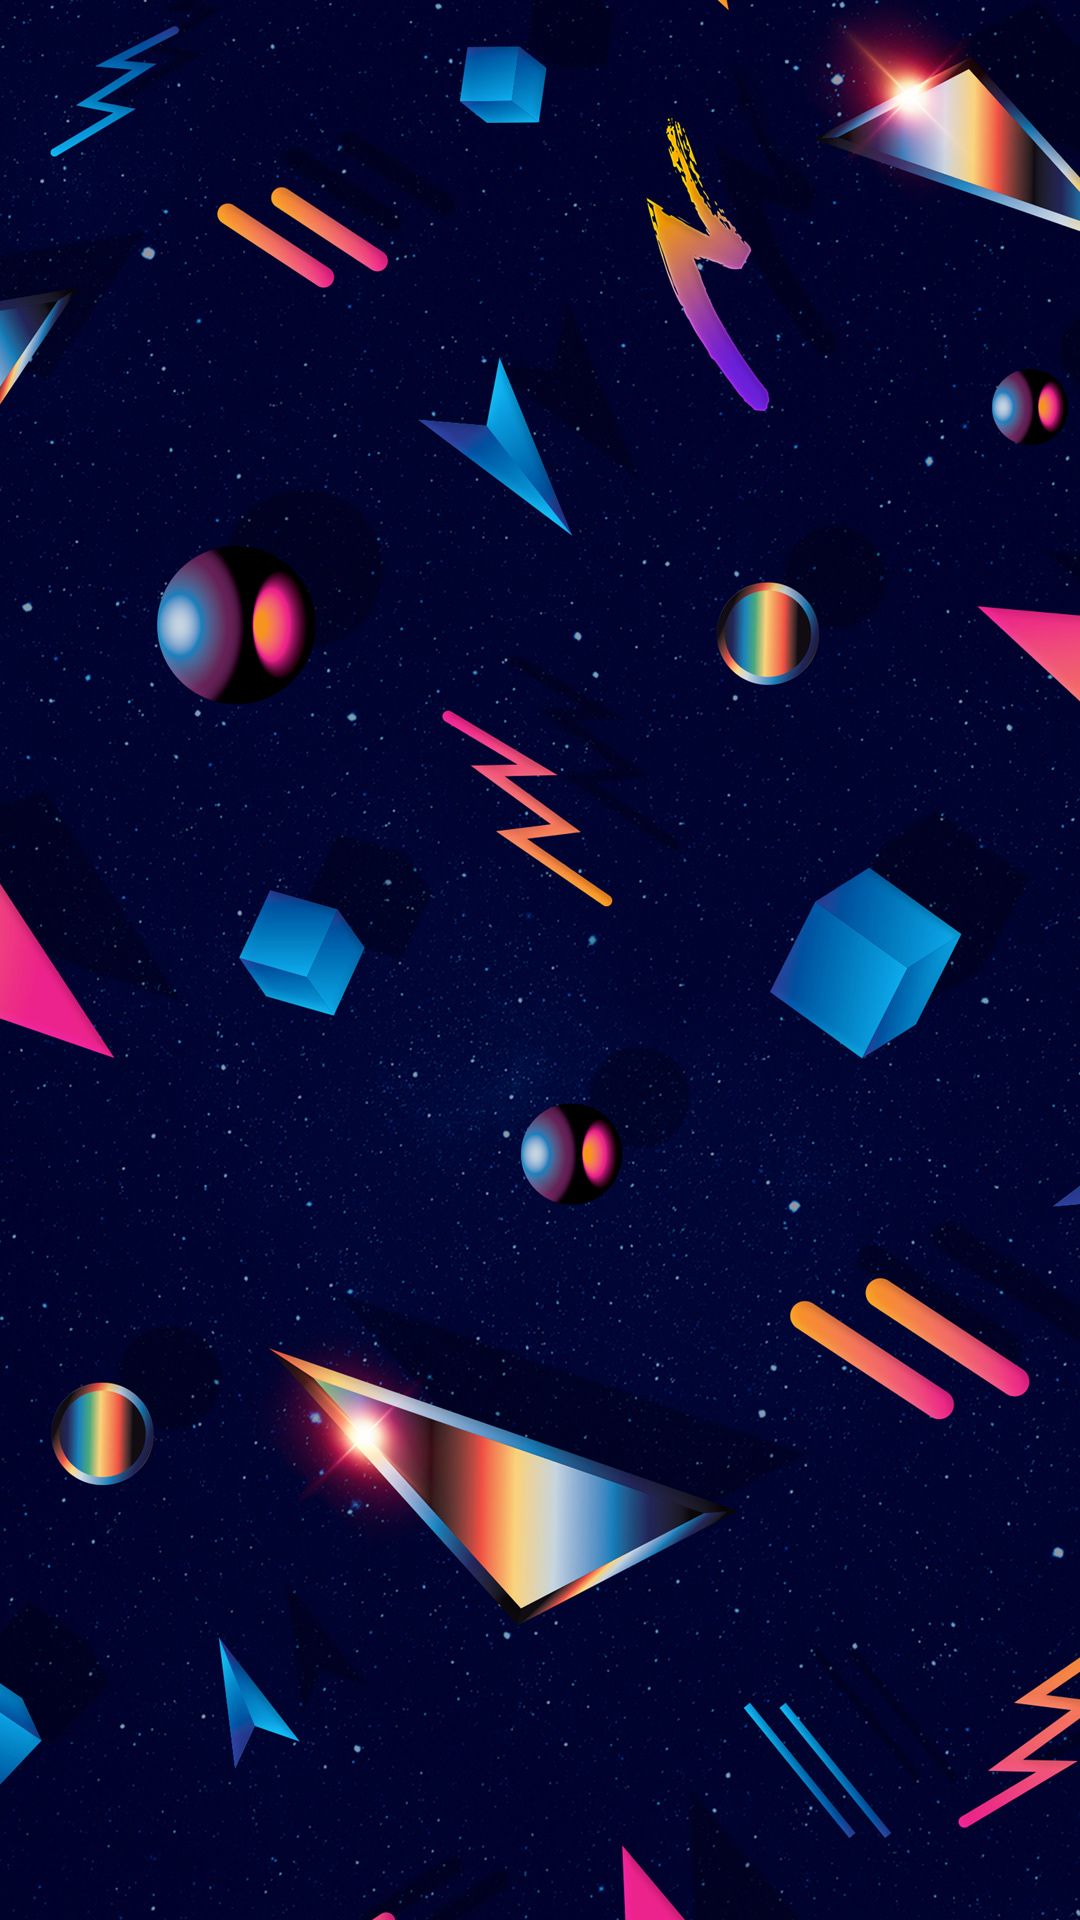 Stay Cool' Wallpaper By Signalnoise. Desktop And Mobile. Right Click And Open Image In. IPhone Homescreen Wallpaper, Black HD Wallpaper Iphone, IPhone Wallpaper